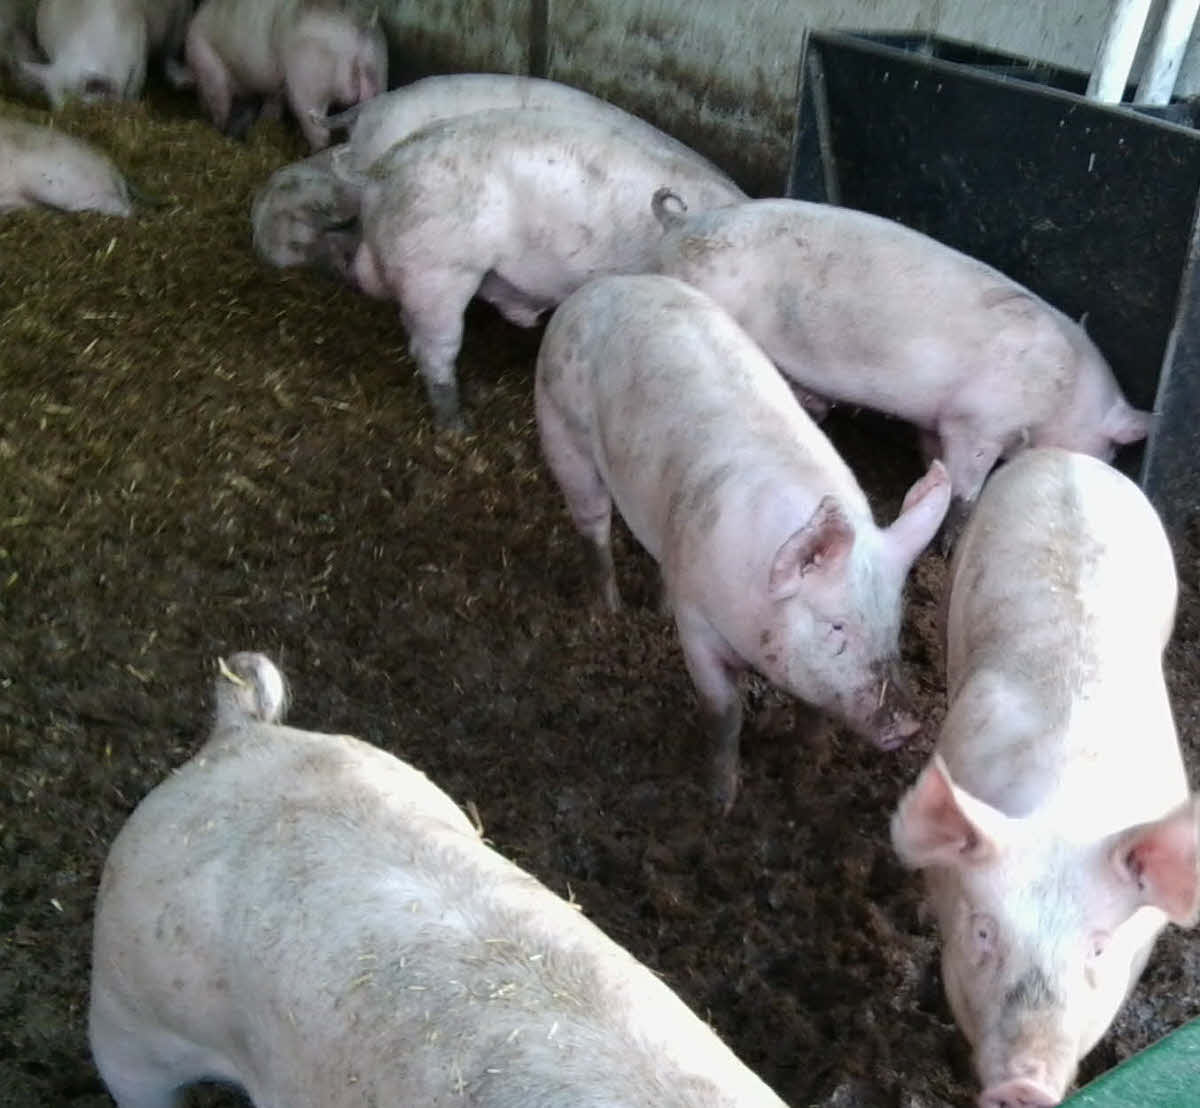 Really smelly pigs in a pen.